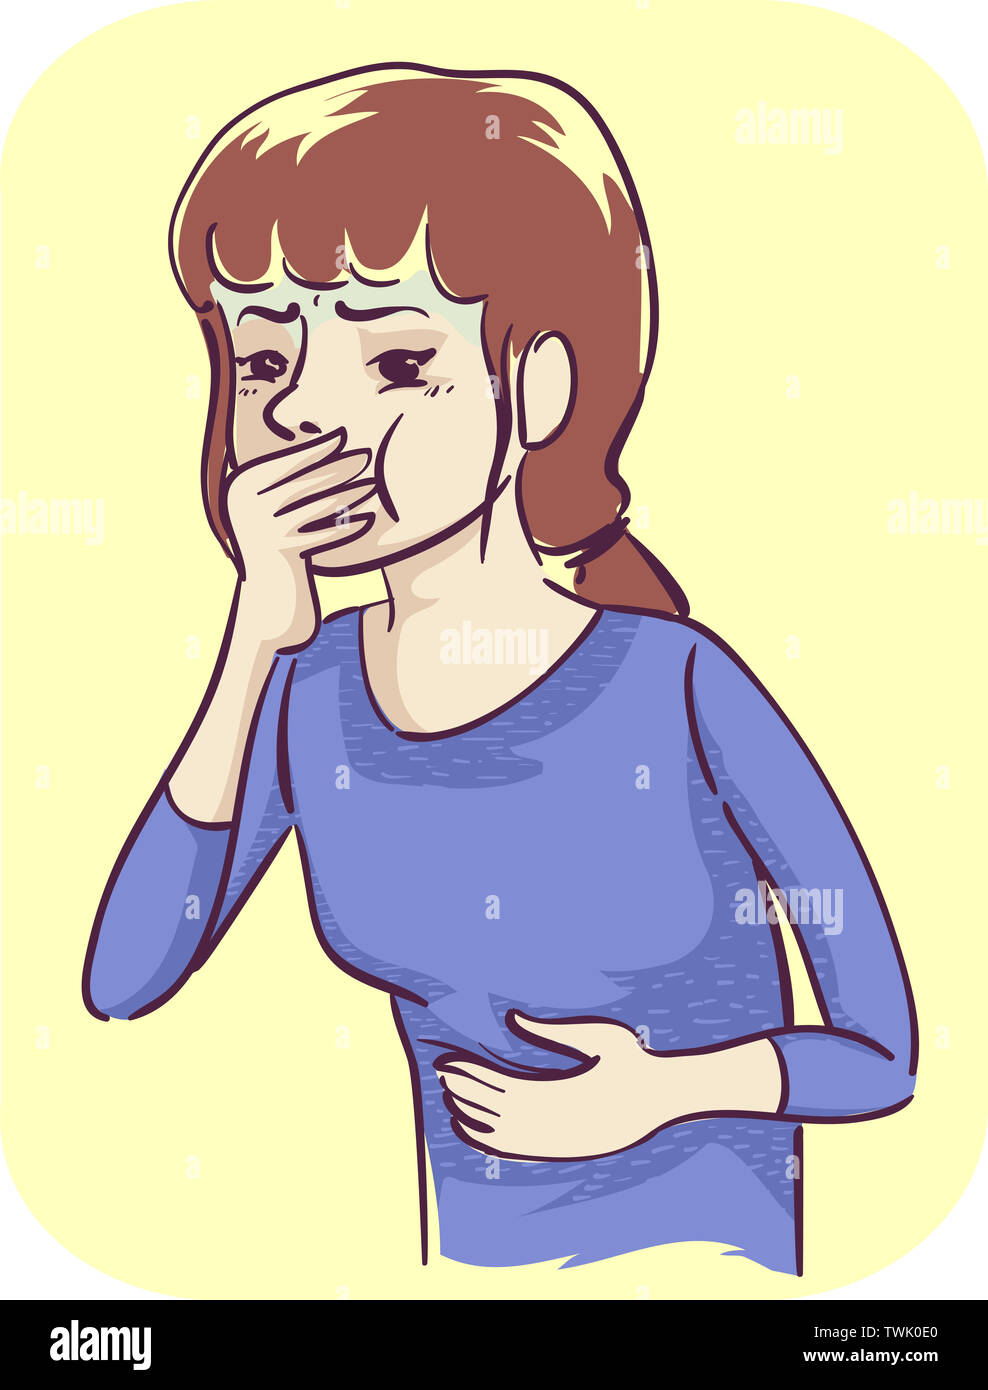 Illustration of a Girl Holding Her Mouth Feeling Nausea Stock Photo - Alamy